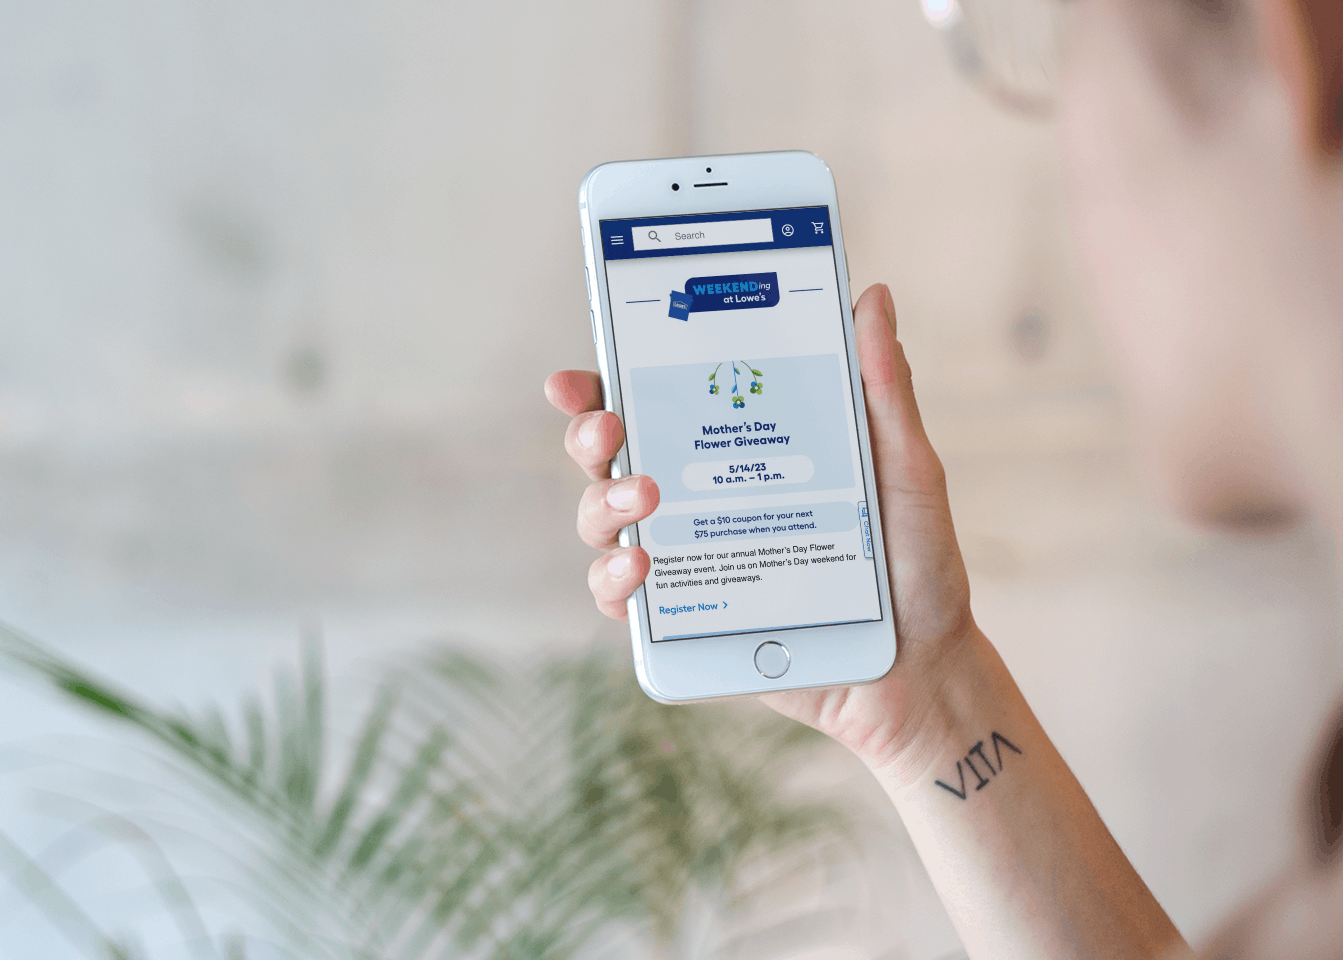 A woman holding up her phone and looking at the Lowe's event page online, showing a $10 coupon is available if you attend the Mother's Da...